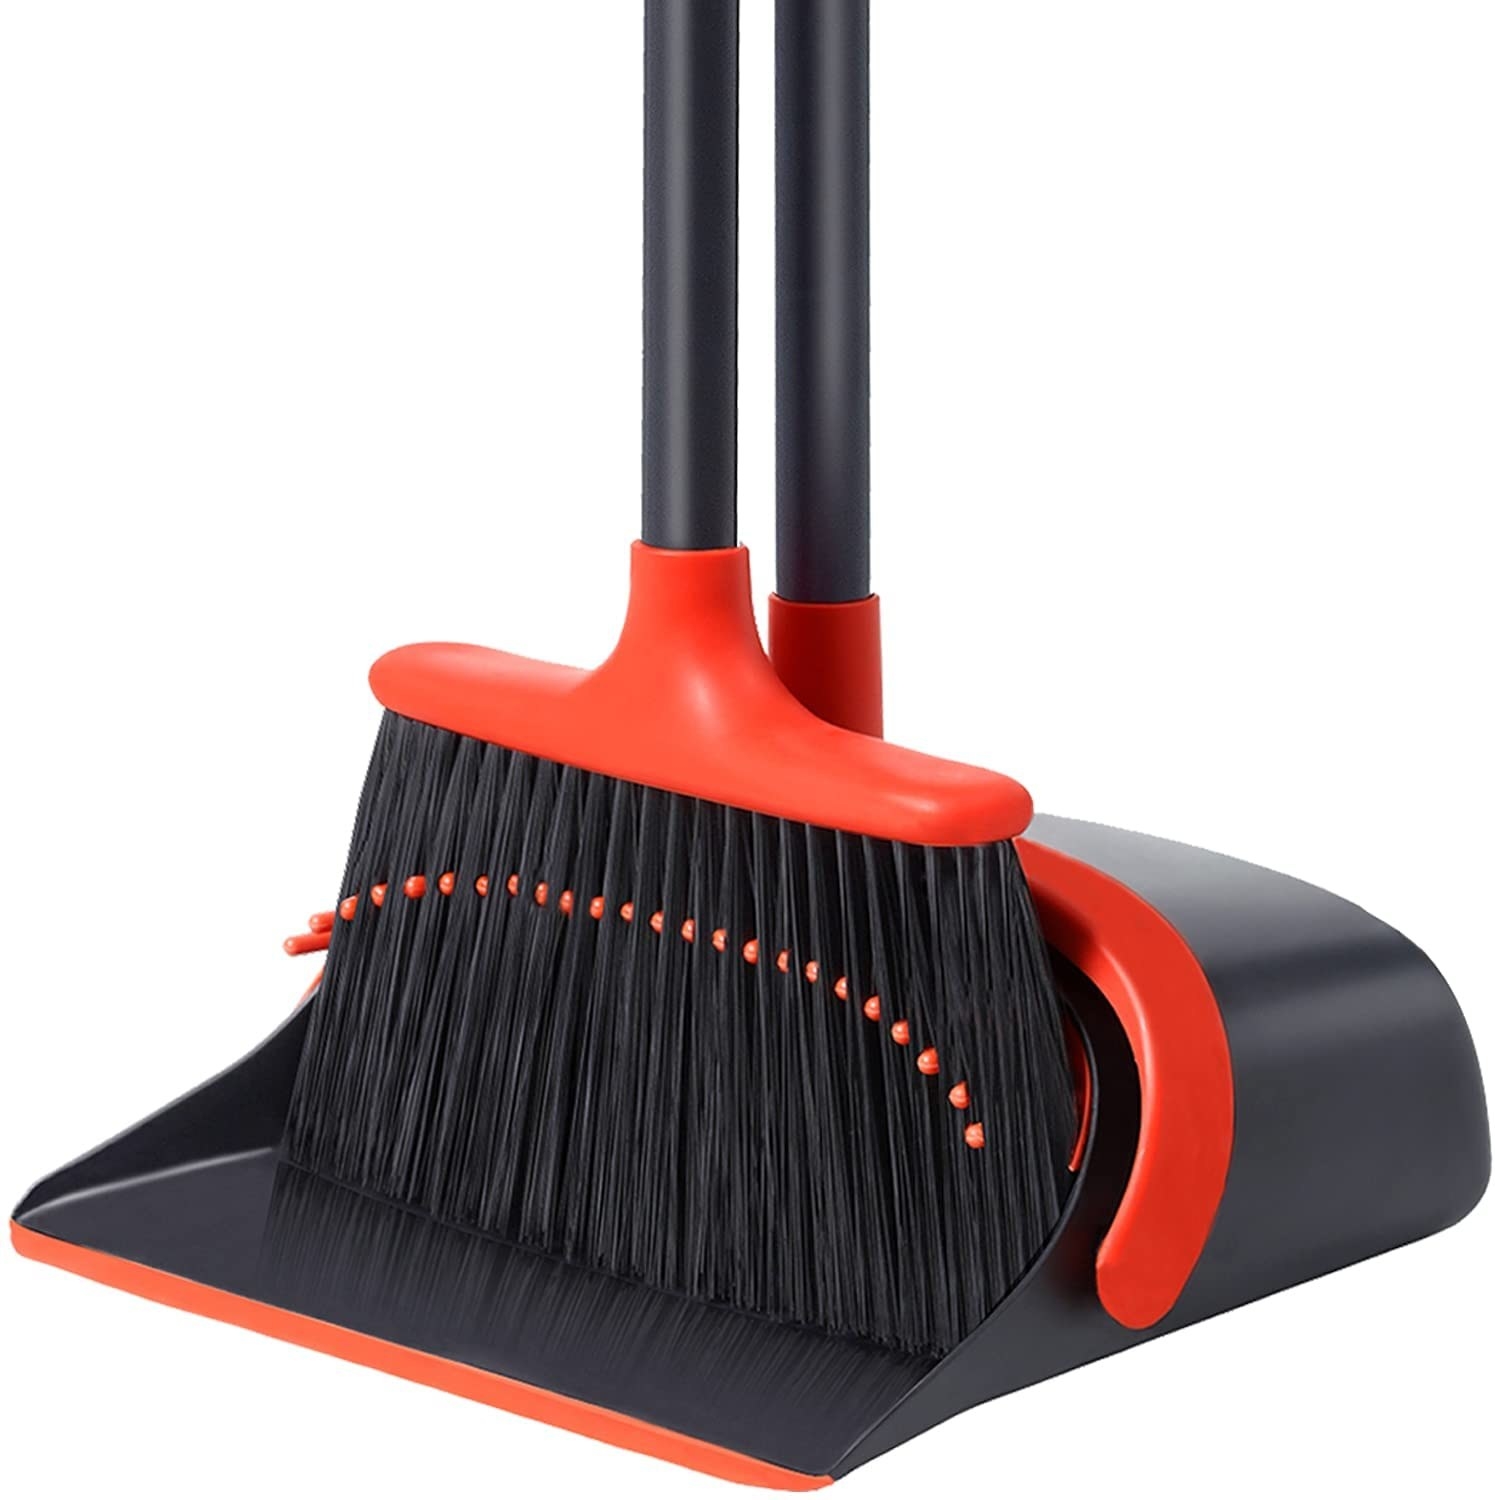 black broom and dust pan with orange accents and the dust pan has teeth on it to clean out the broom